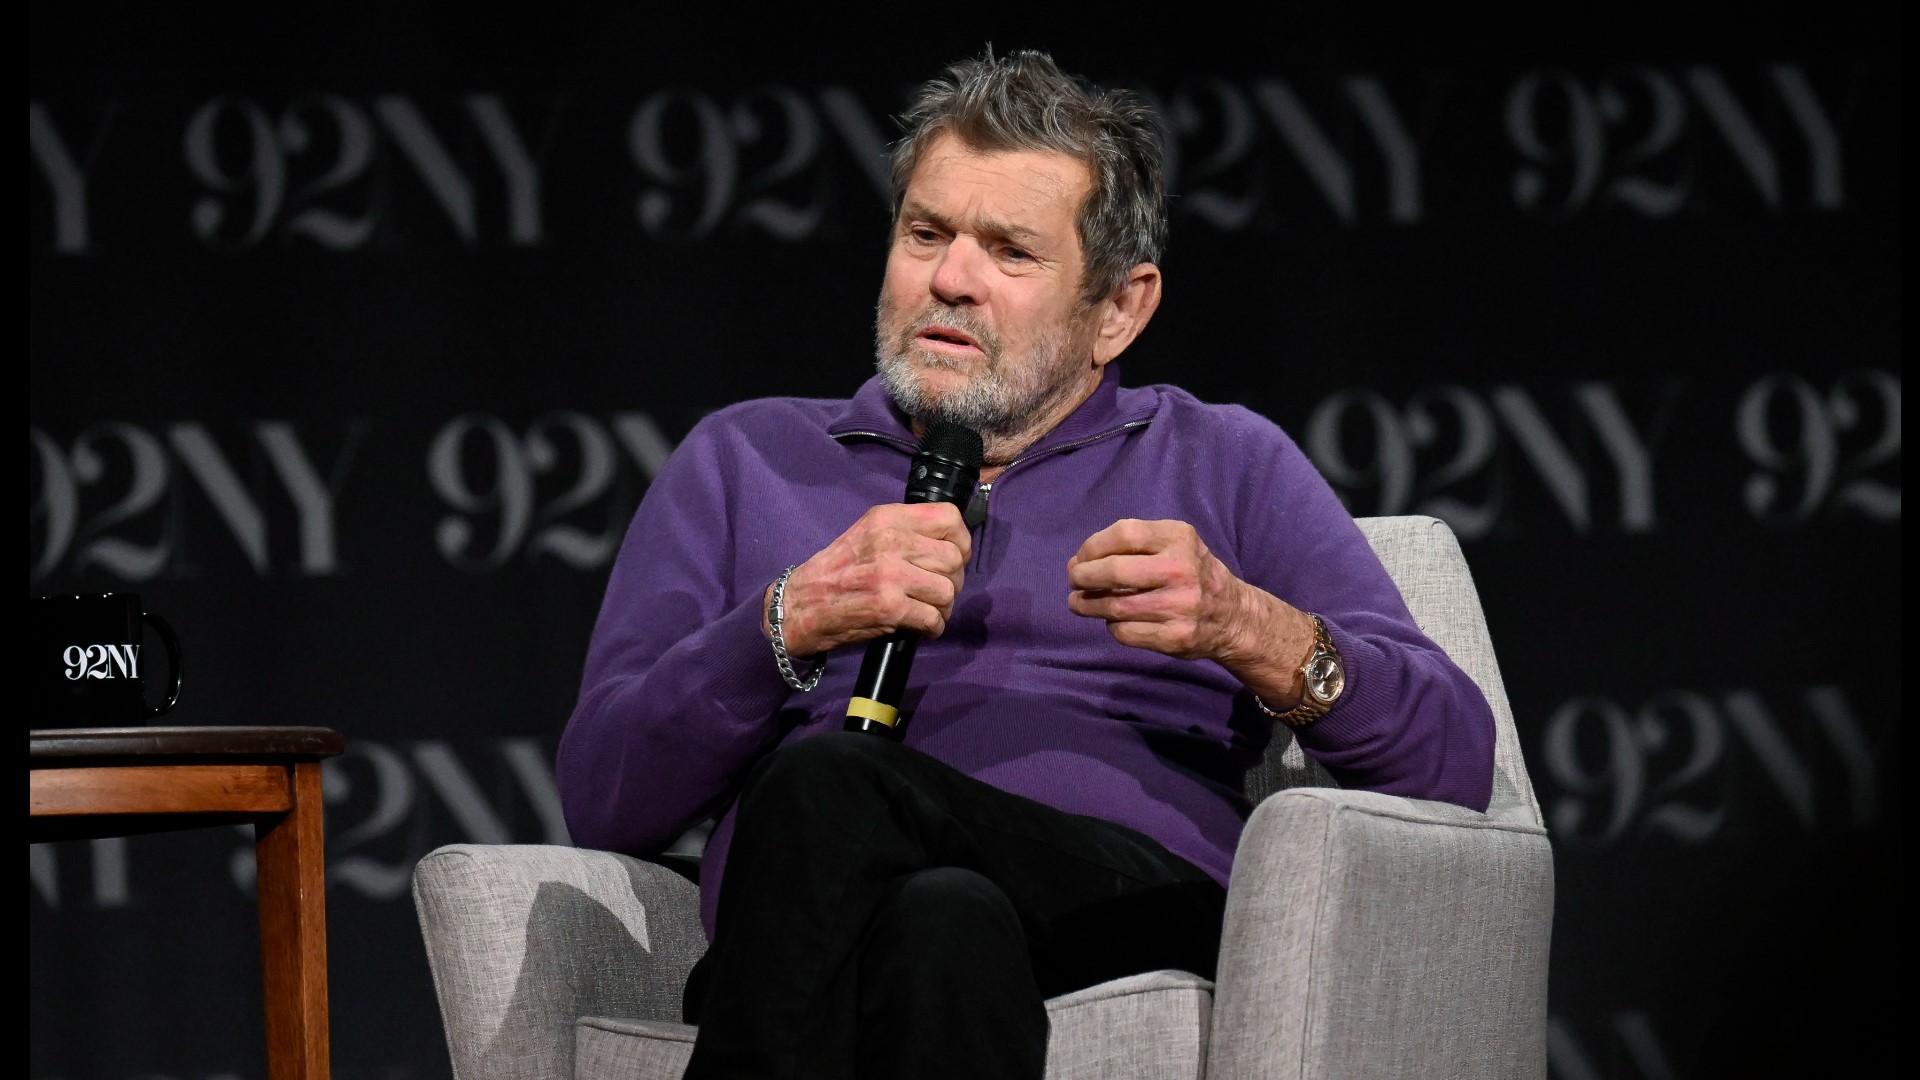 The move came a day after Wenner’s comments were published in a New York Times interview.